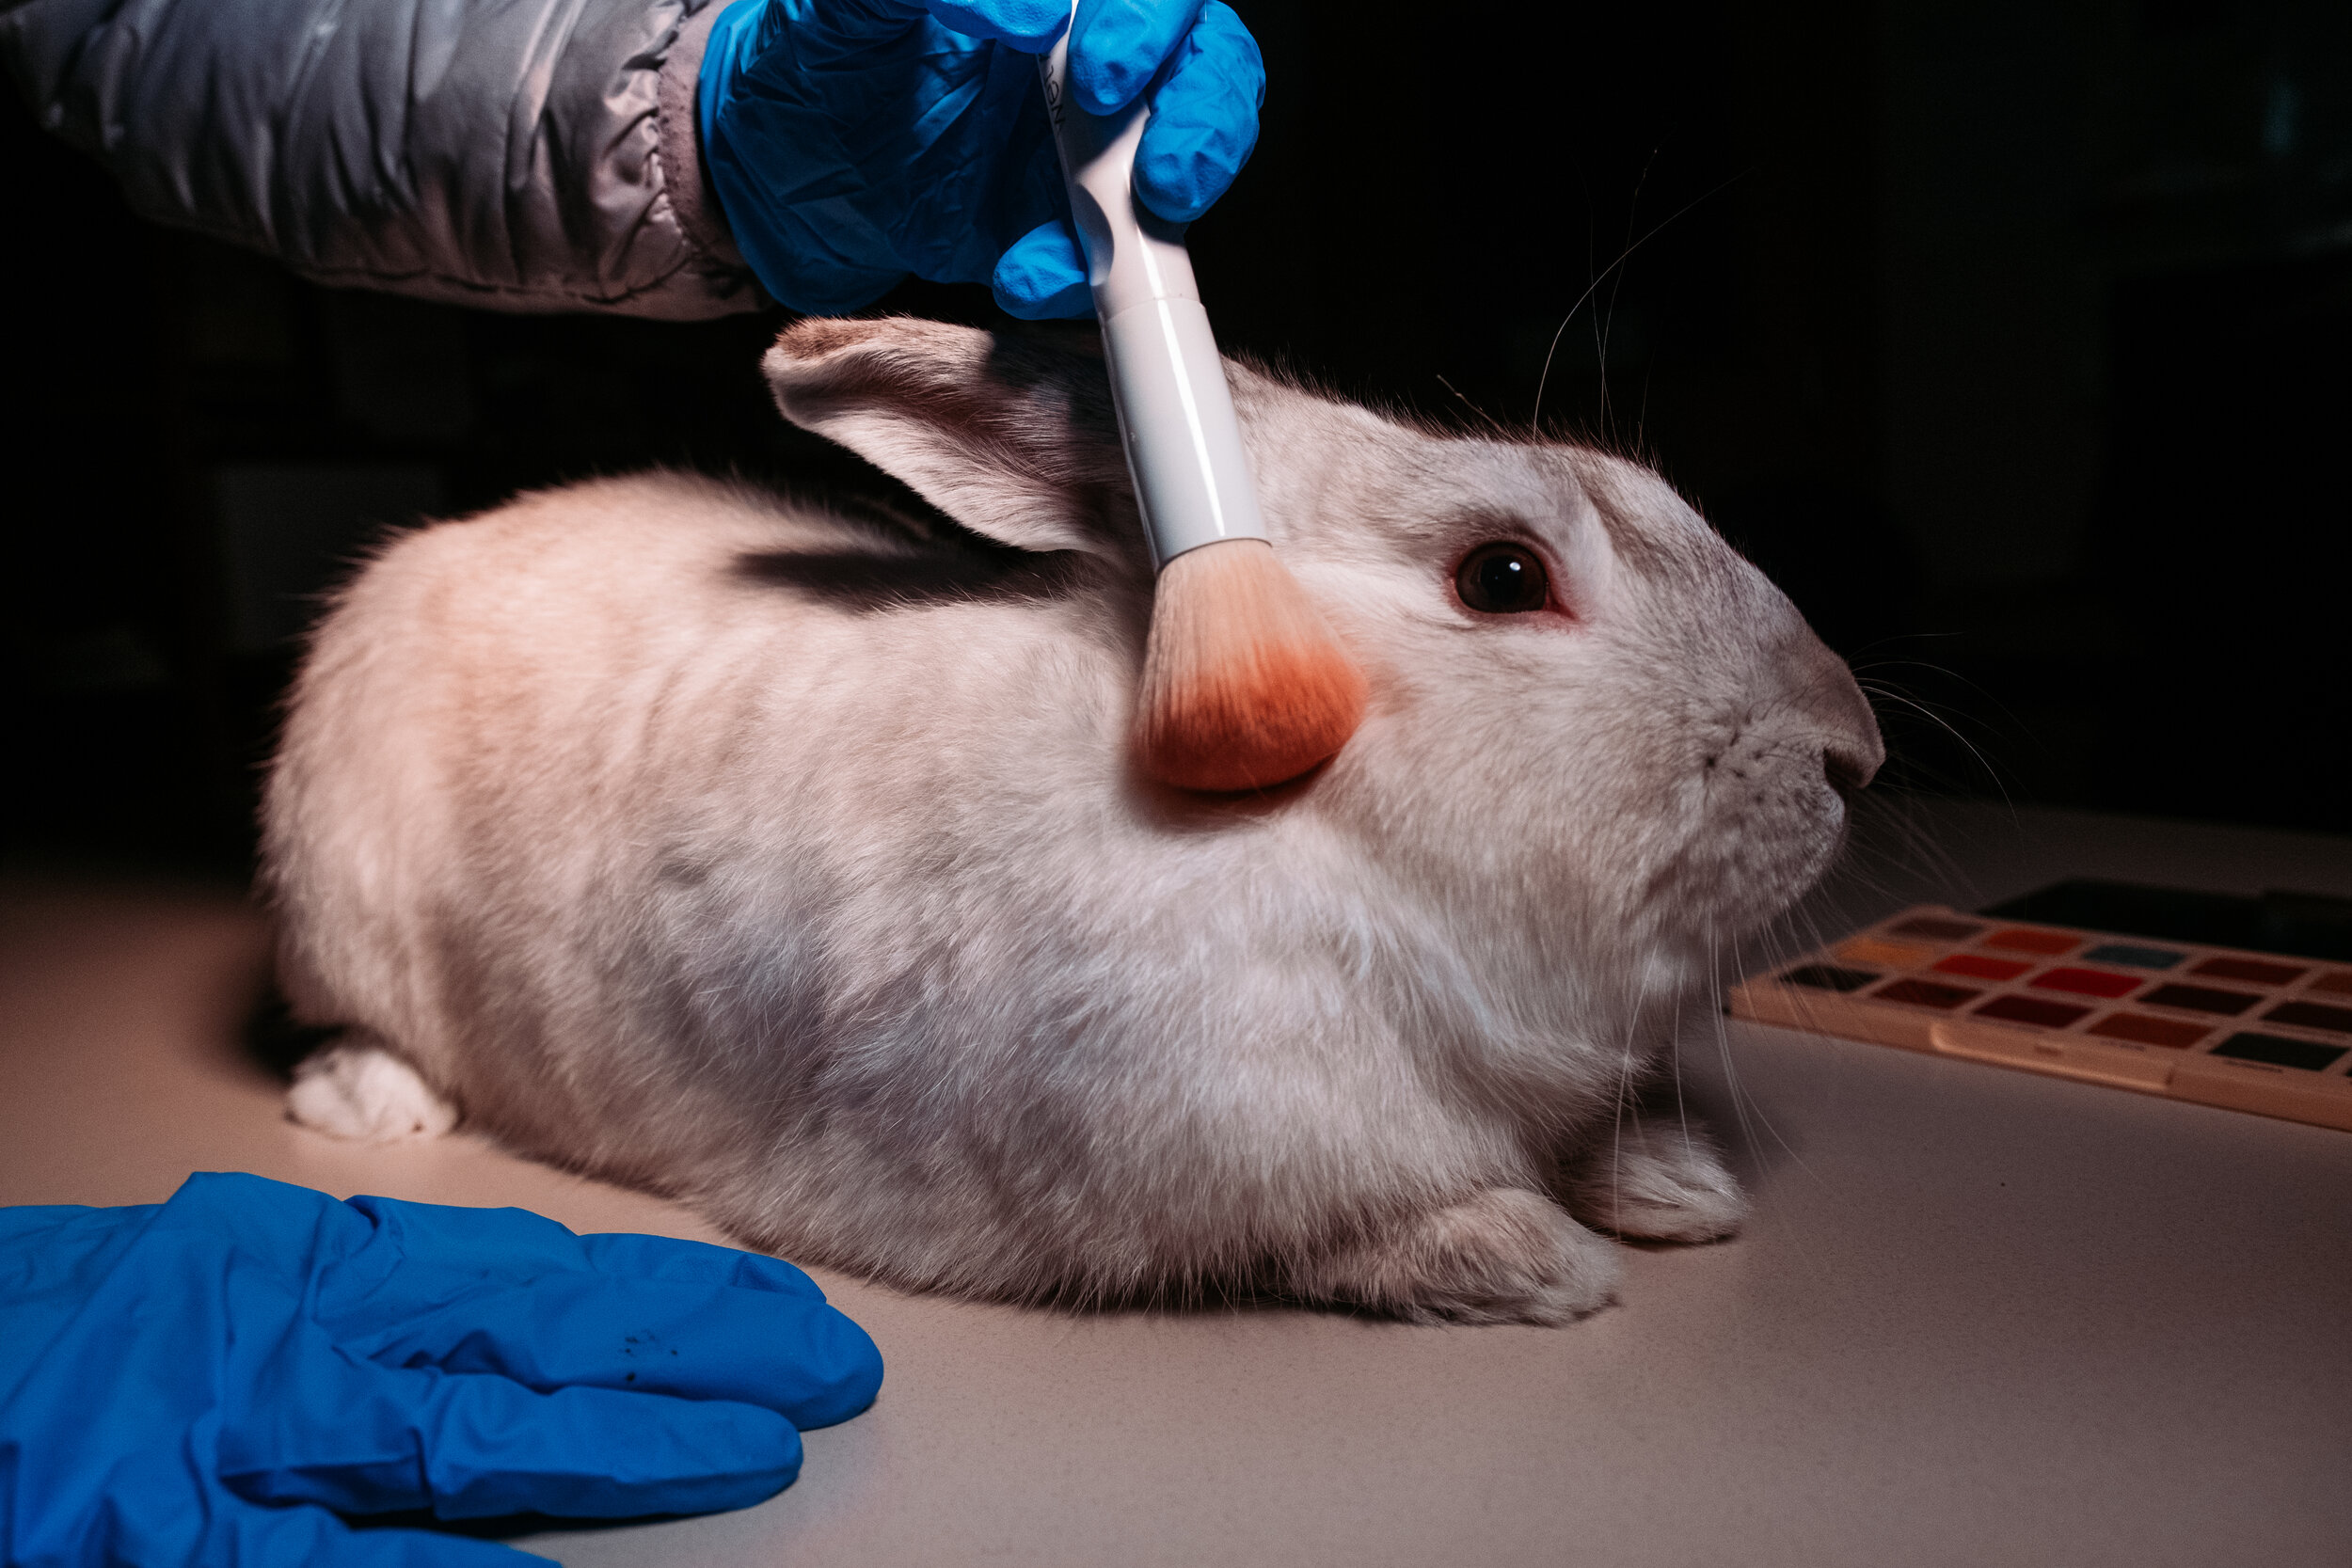 medical research animal experimentation